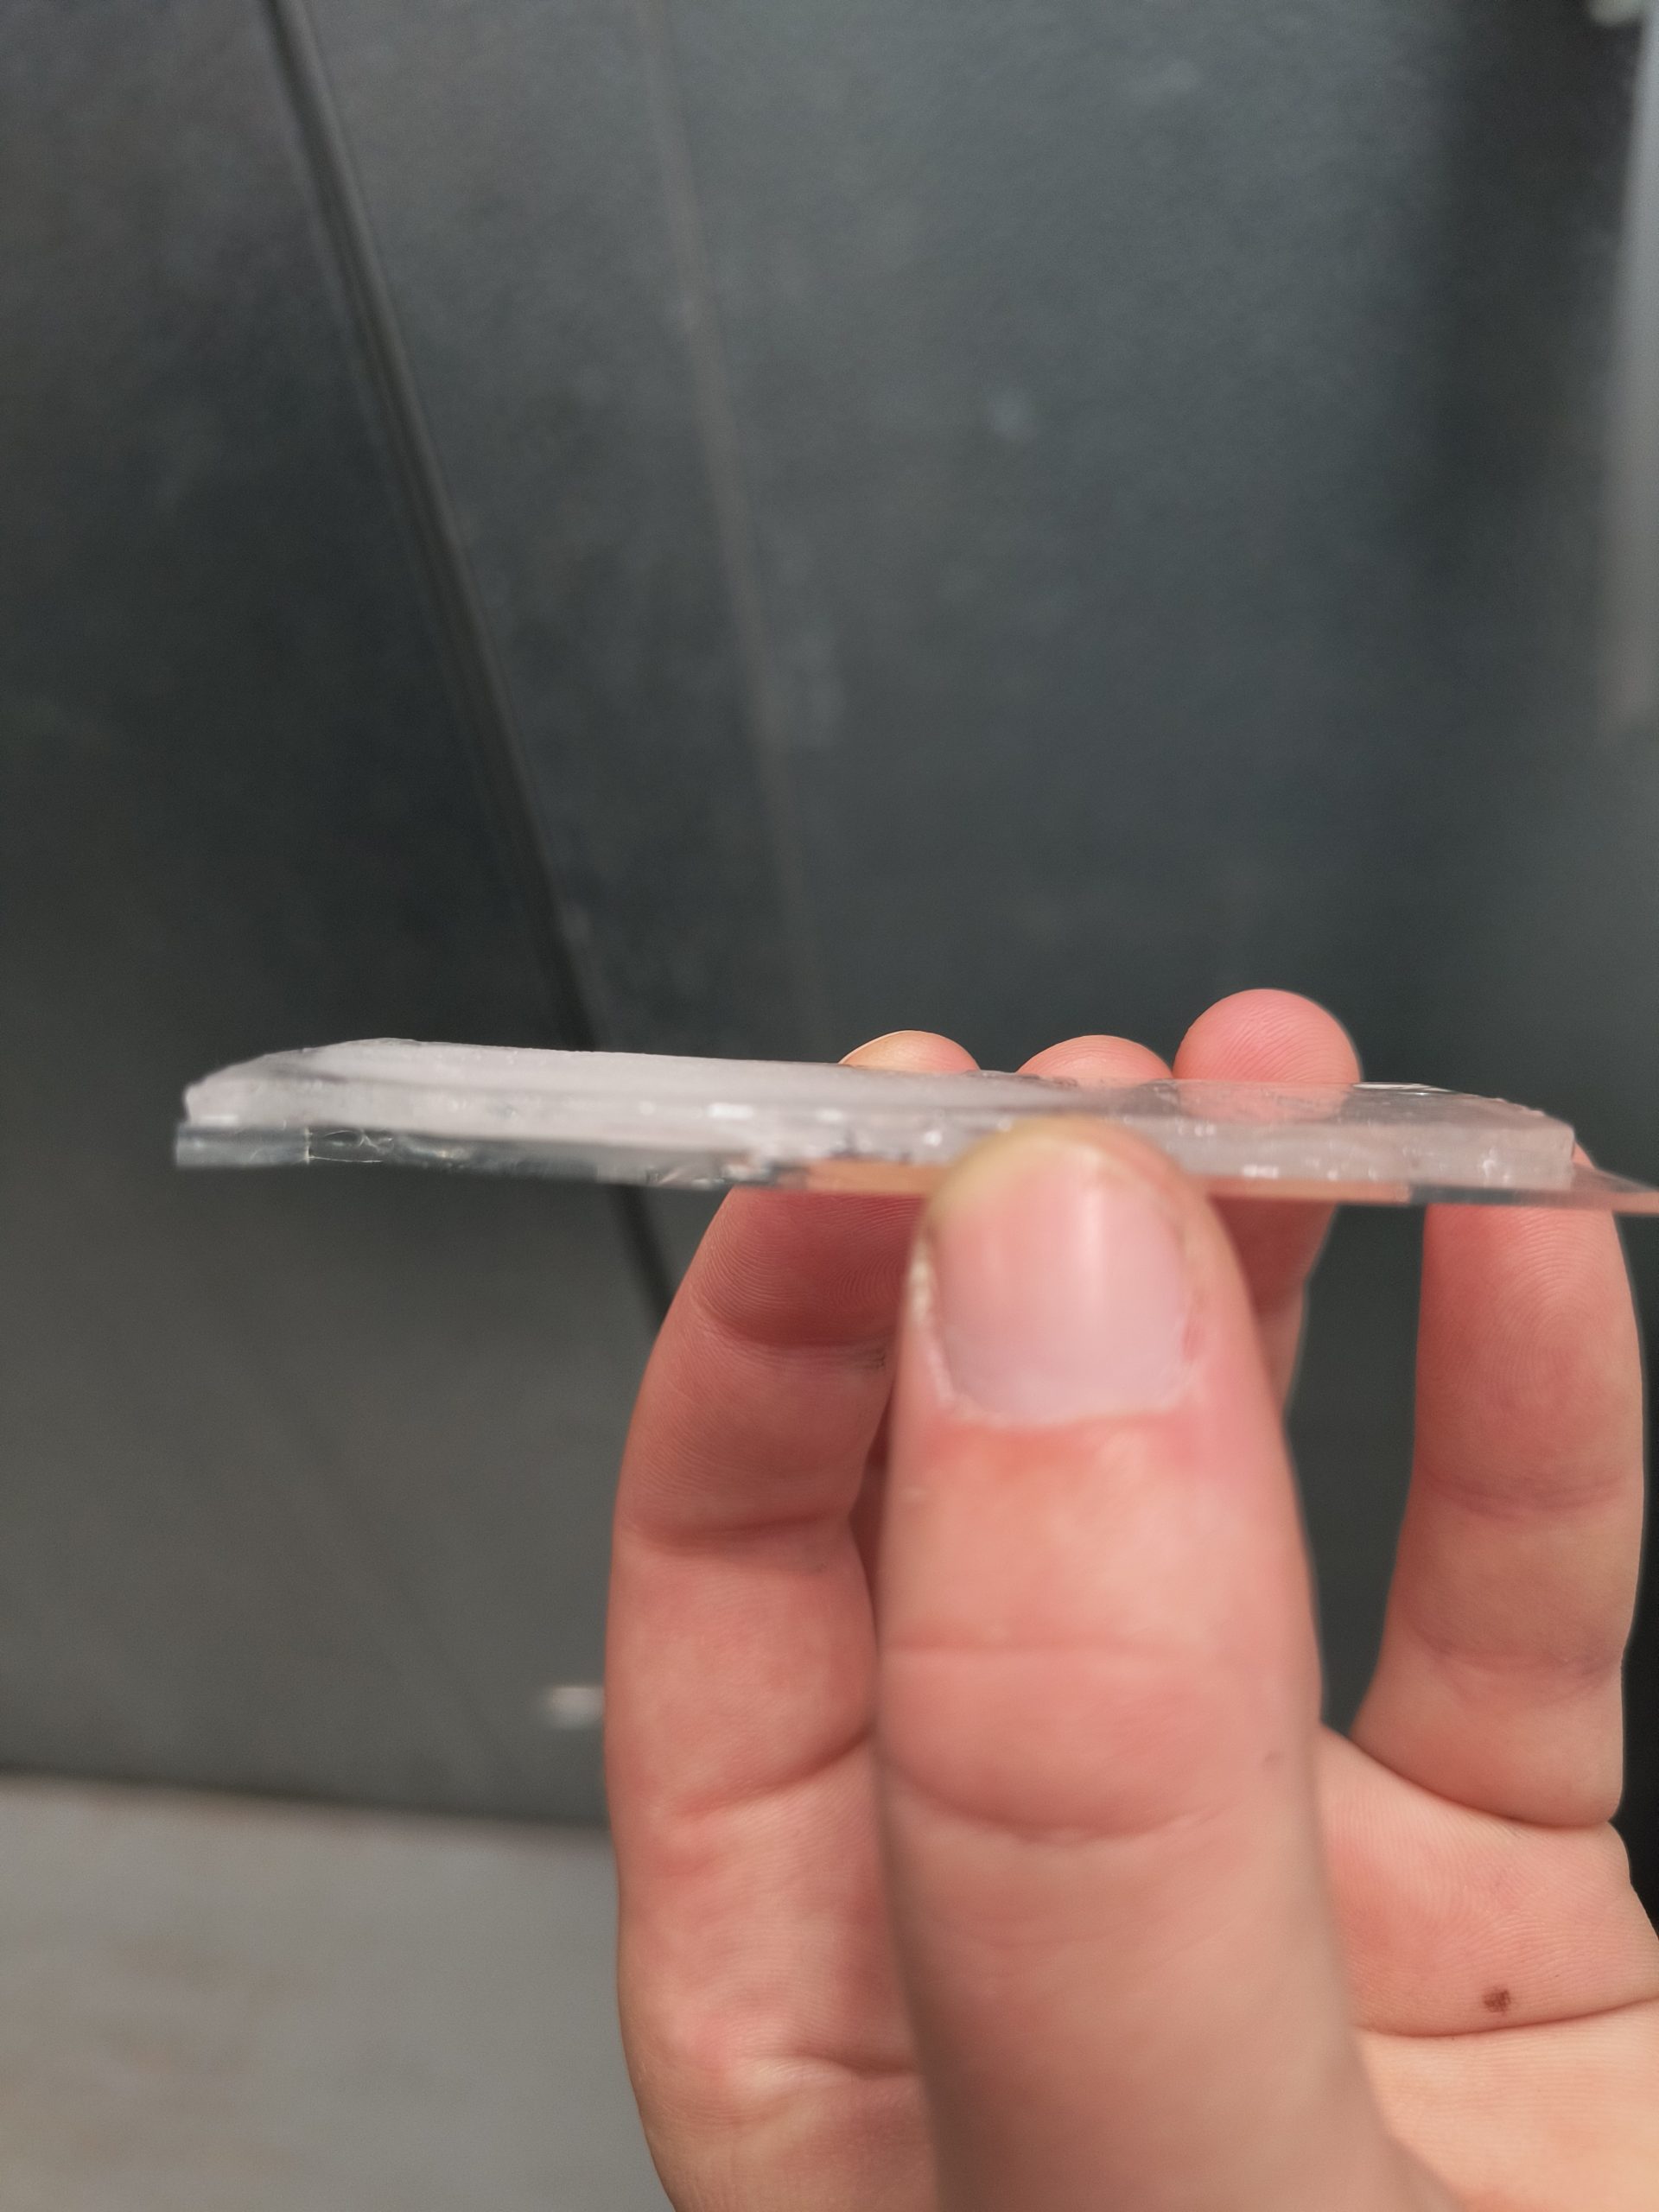 A hand holds up an ice sample on a specimen slide, both of which are only a few millimeters thick